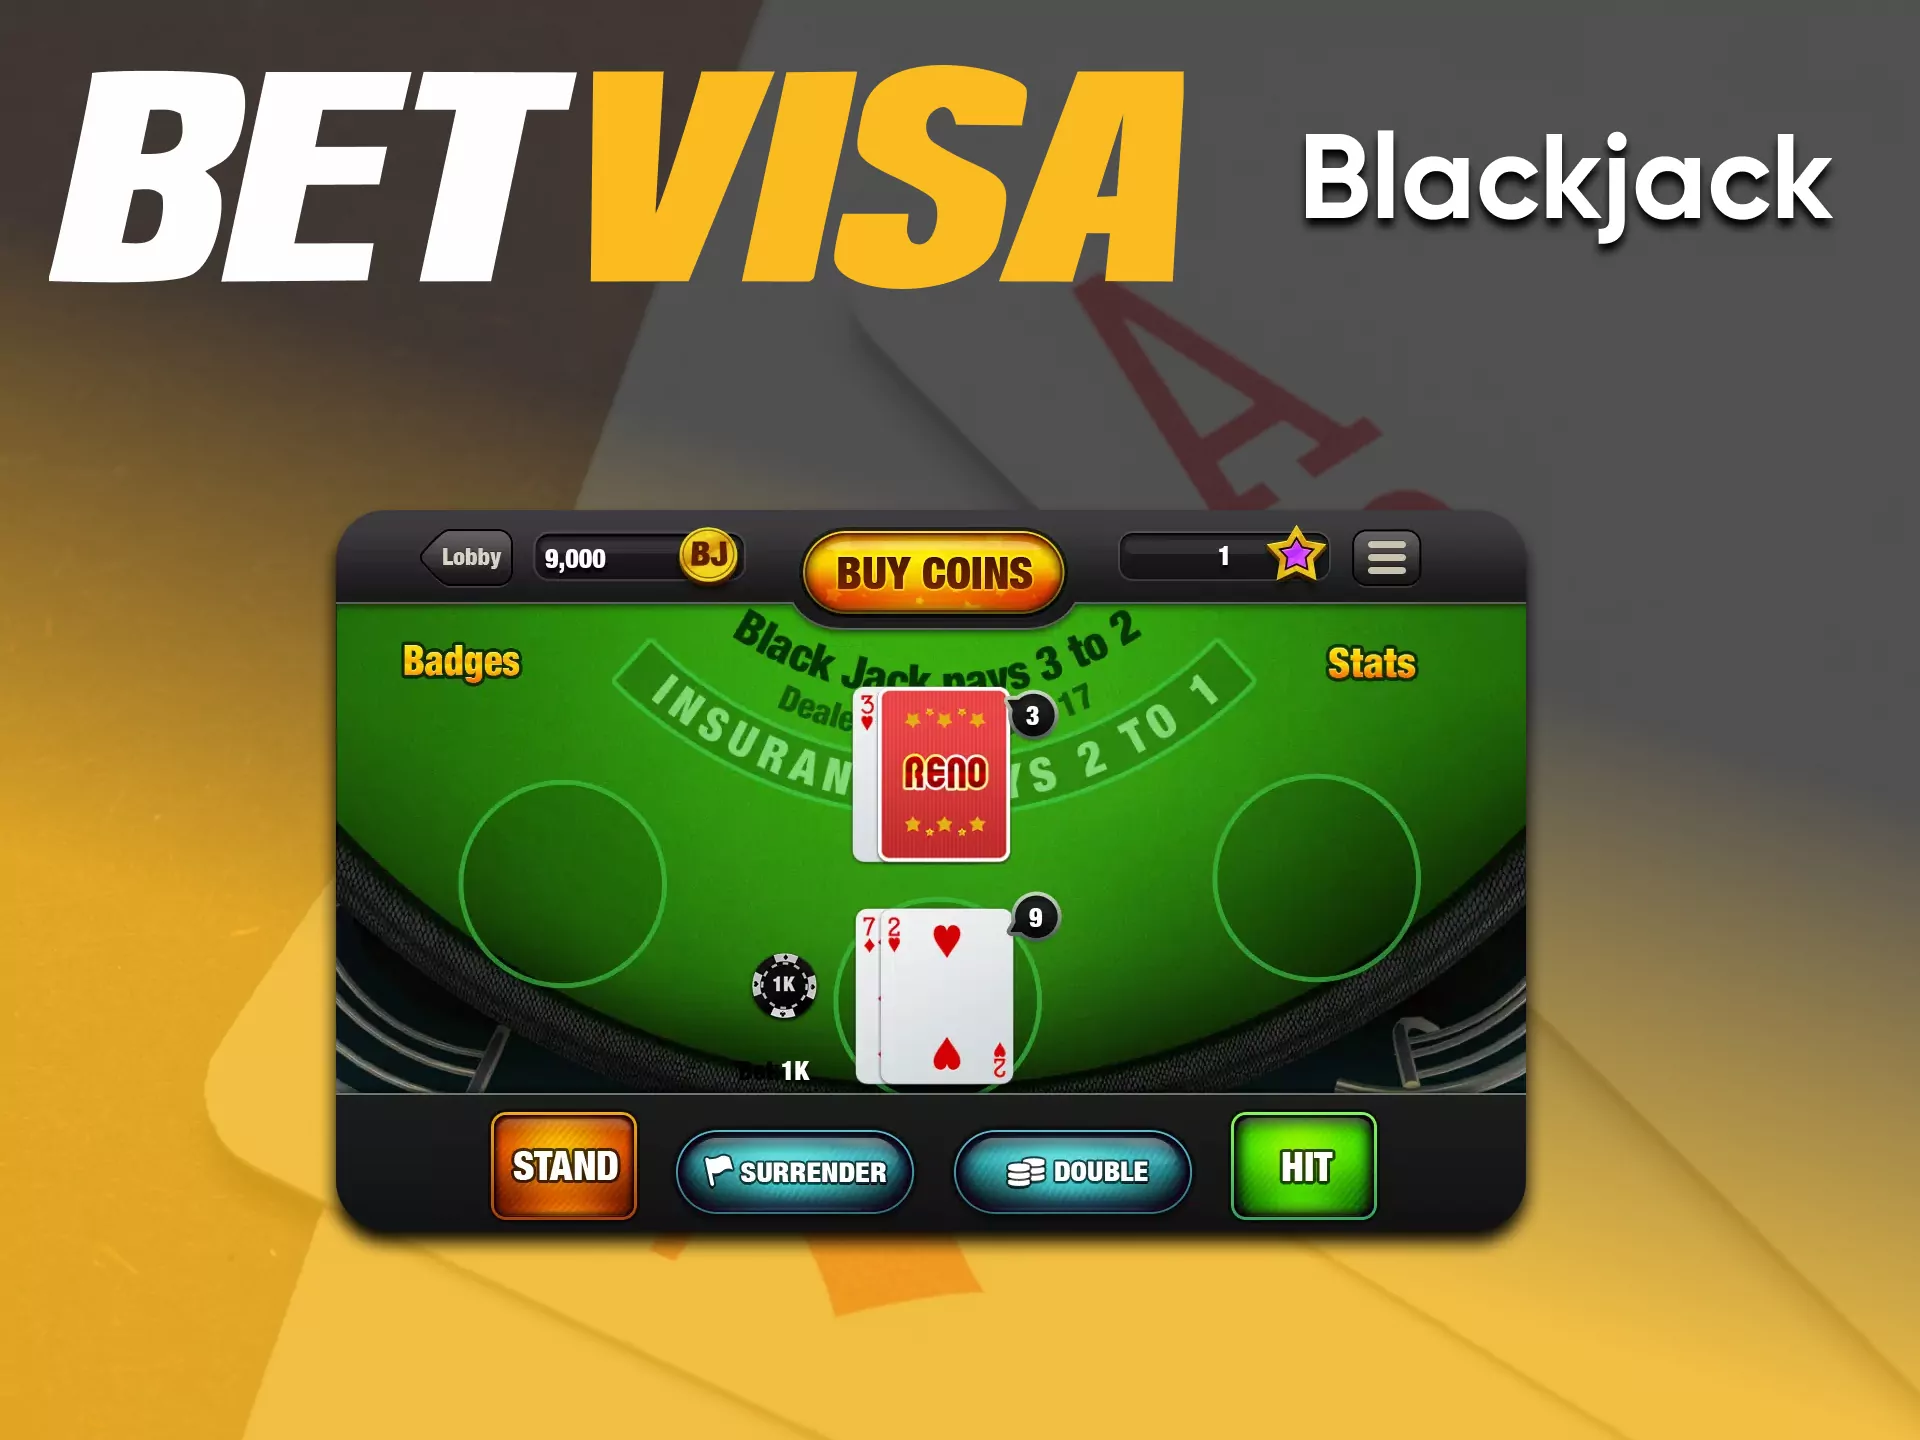 Go to the right section to play BlackJack by BetVisa.